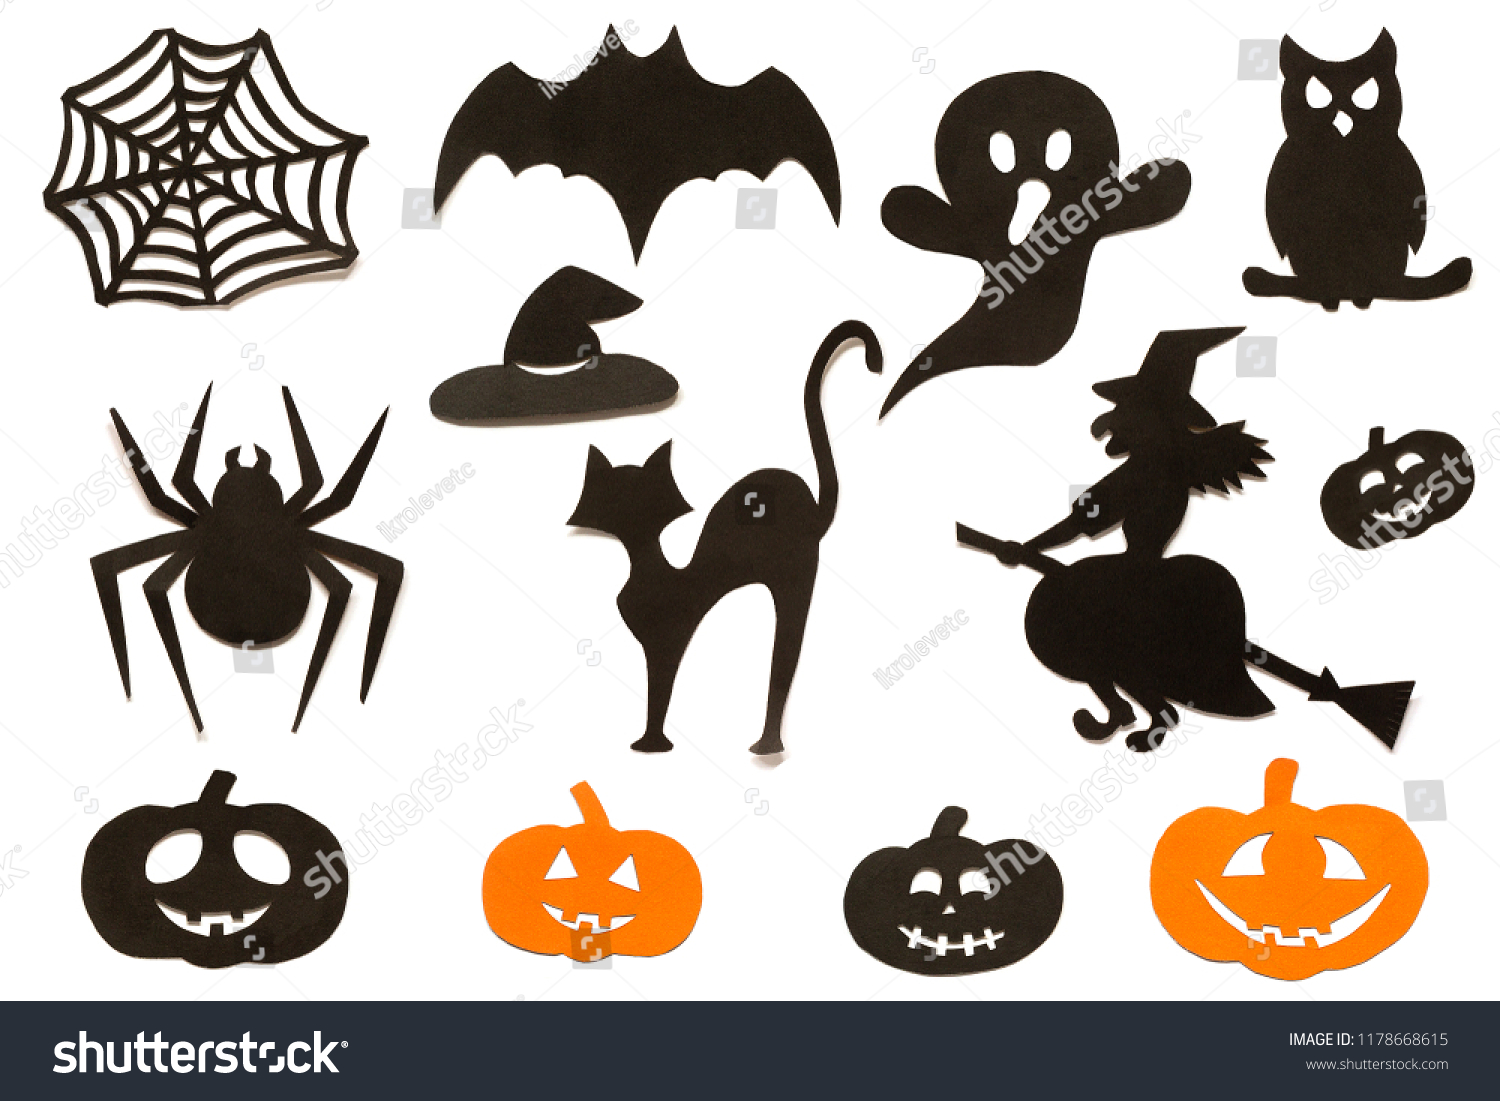 Halloween Crafting Assorted Halloween Shapes Pumpkin & Spider Cat Shapes: Witch Hat Bat Ghost Pack of 6 Halloween Acrylic Cutouts